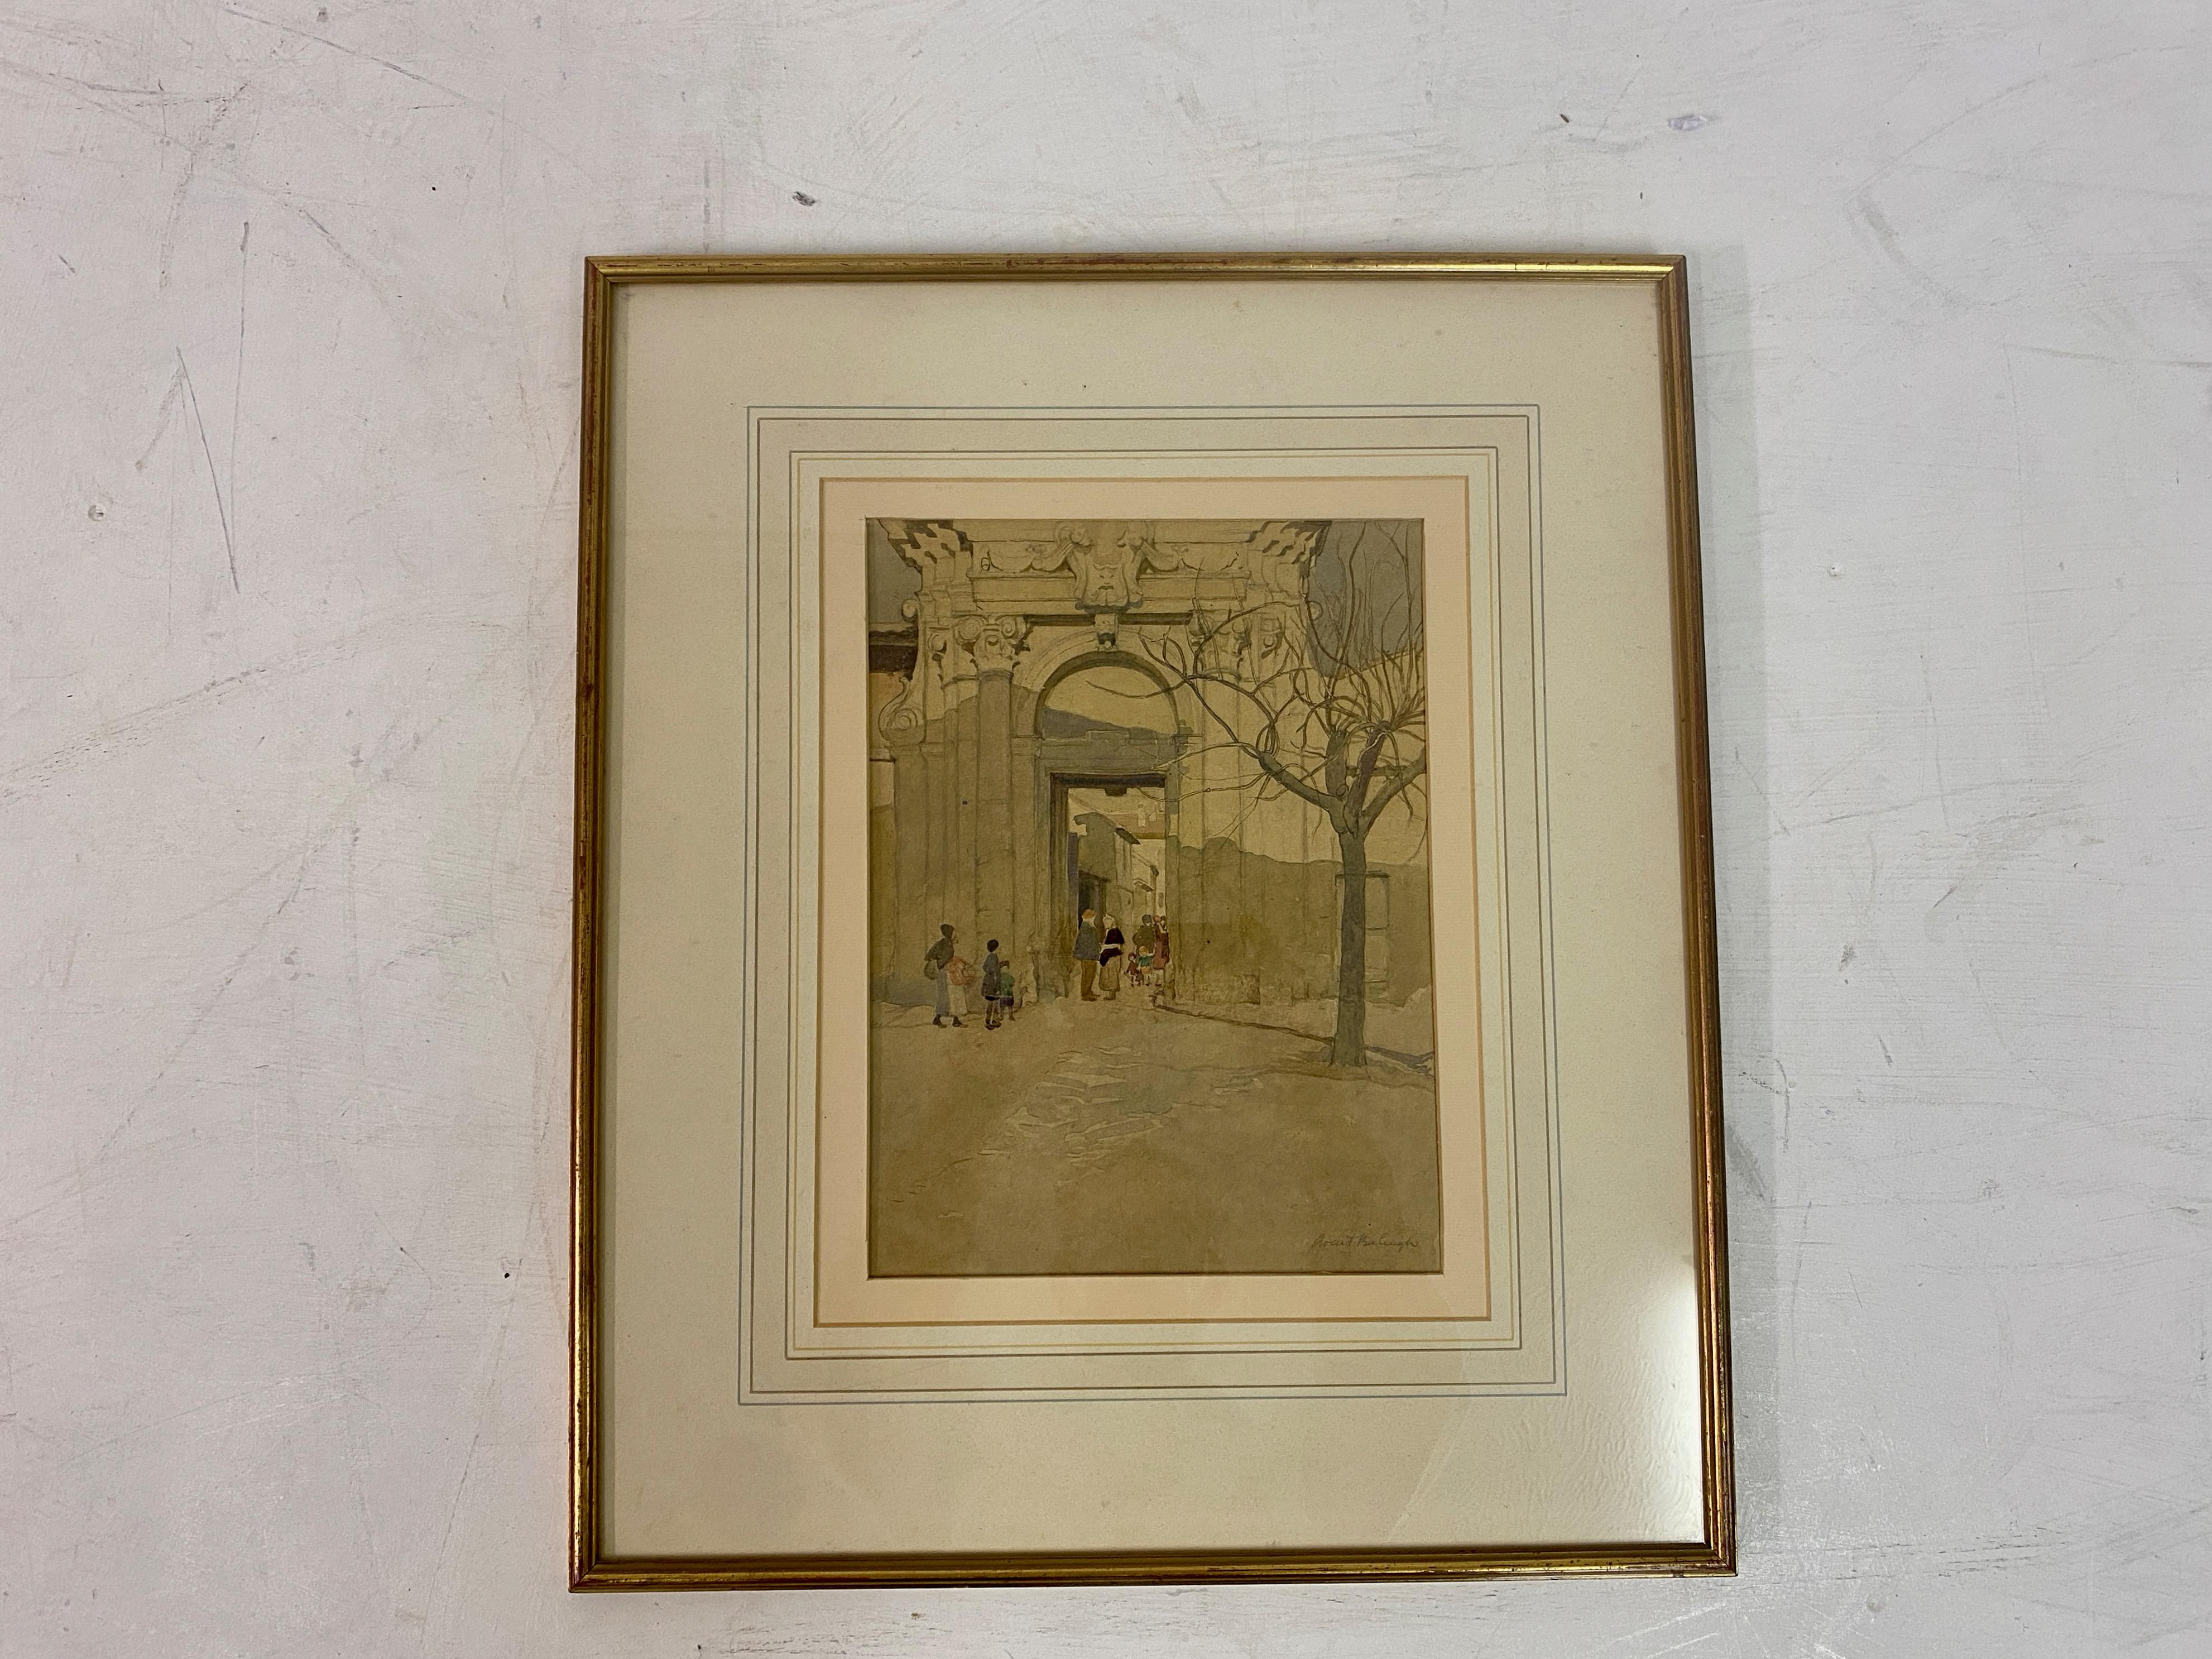 Watercolour and pencil

By Averil Burleigh (1883-1949)

Signed bottom right.